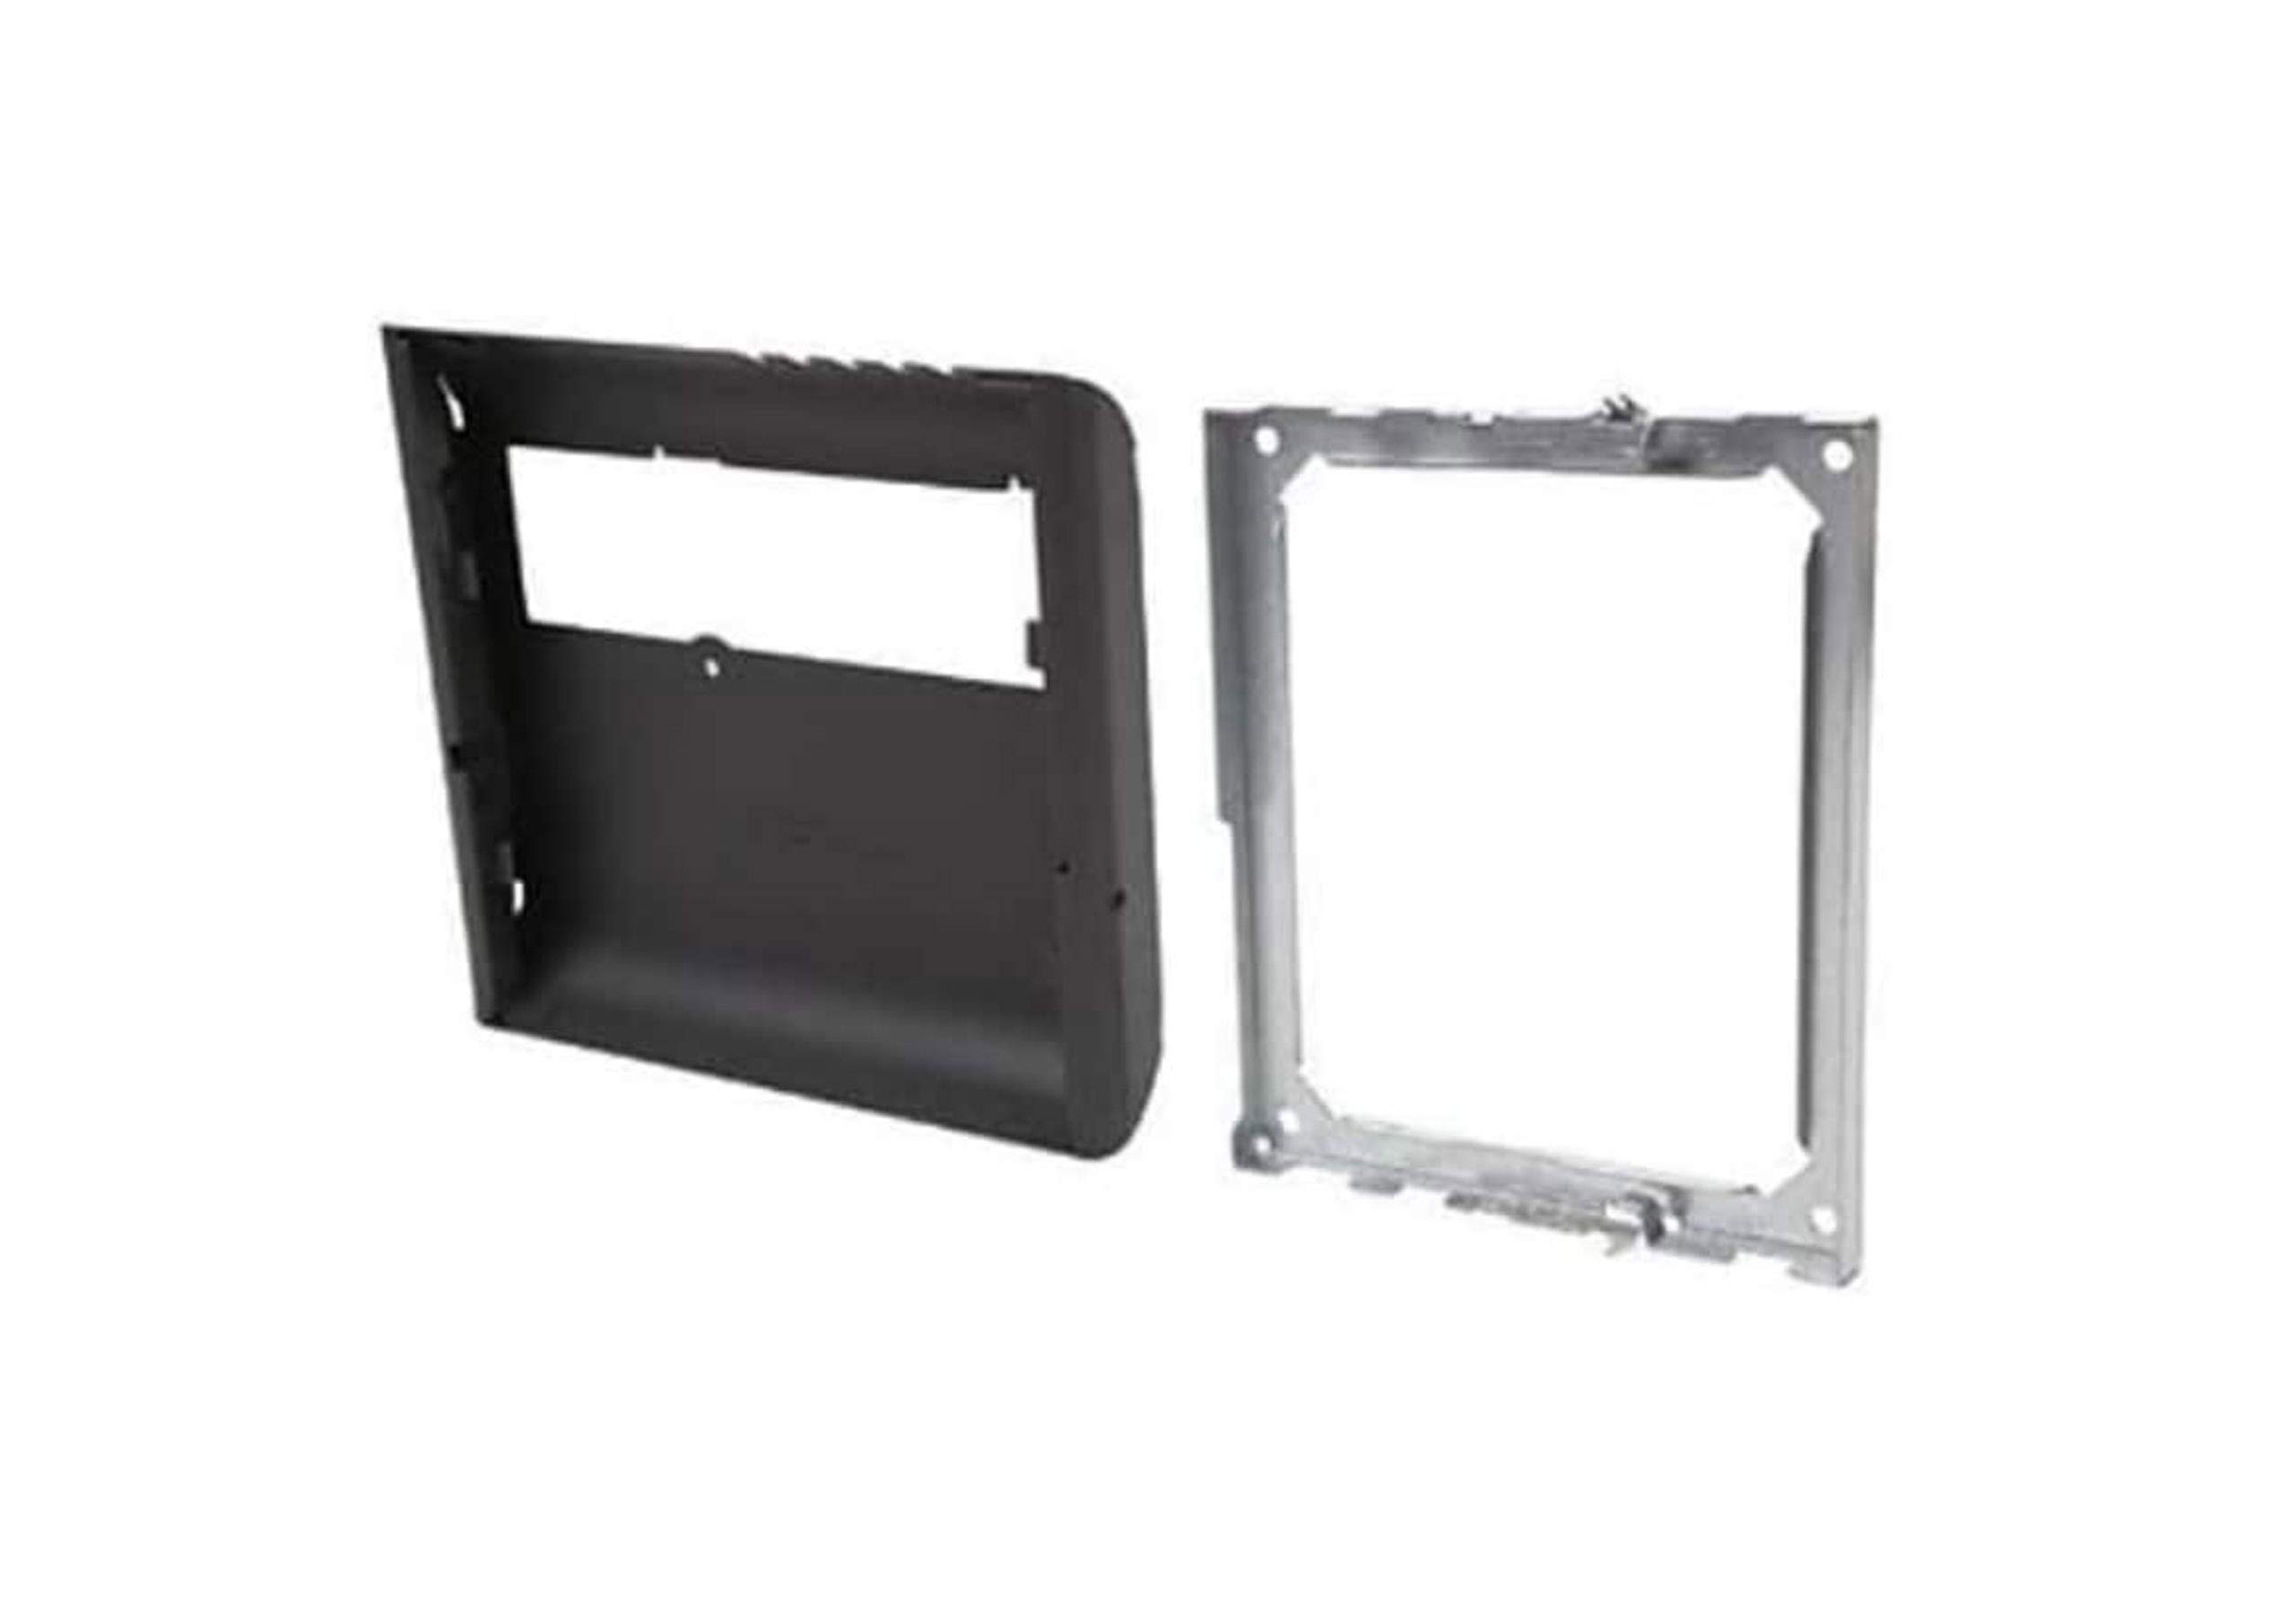 WALL MOUNT KIT FOR CISCO IP